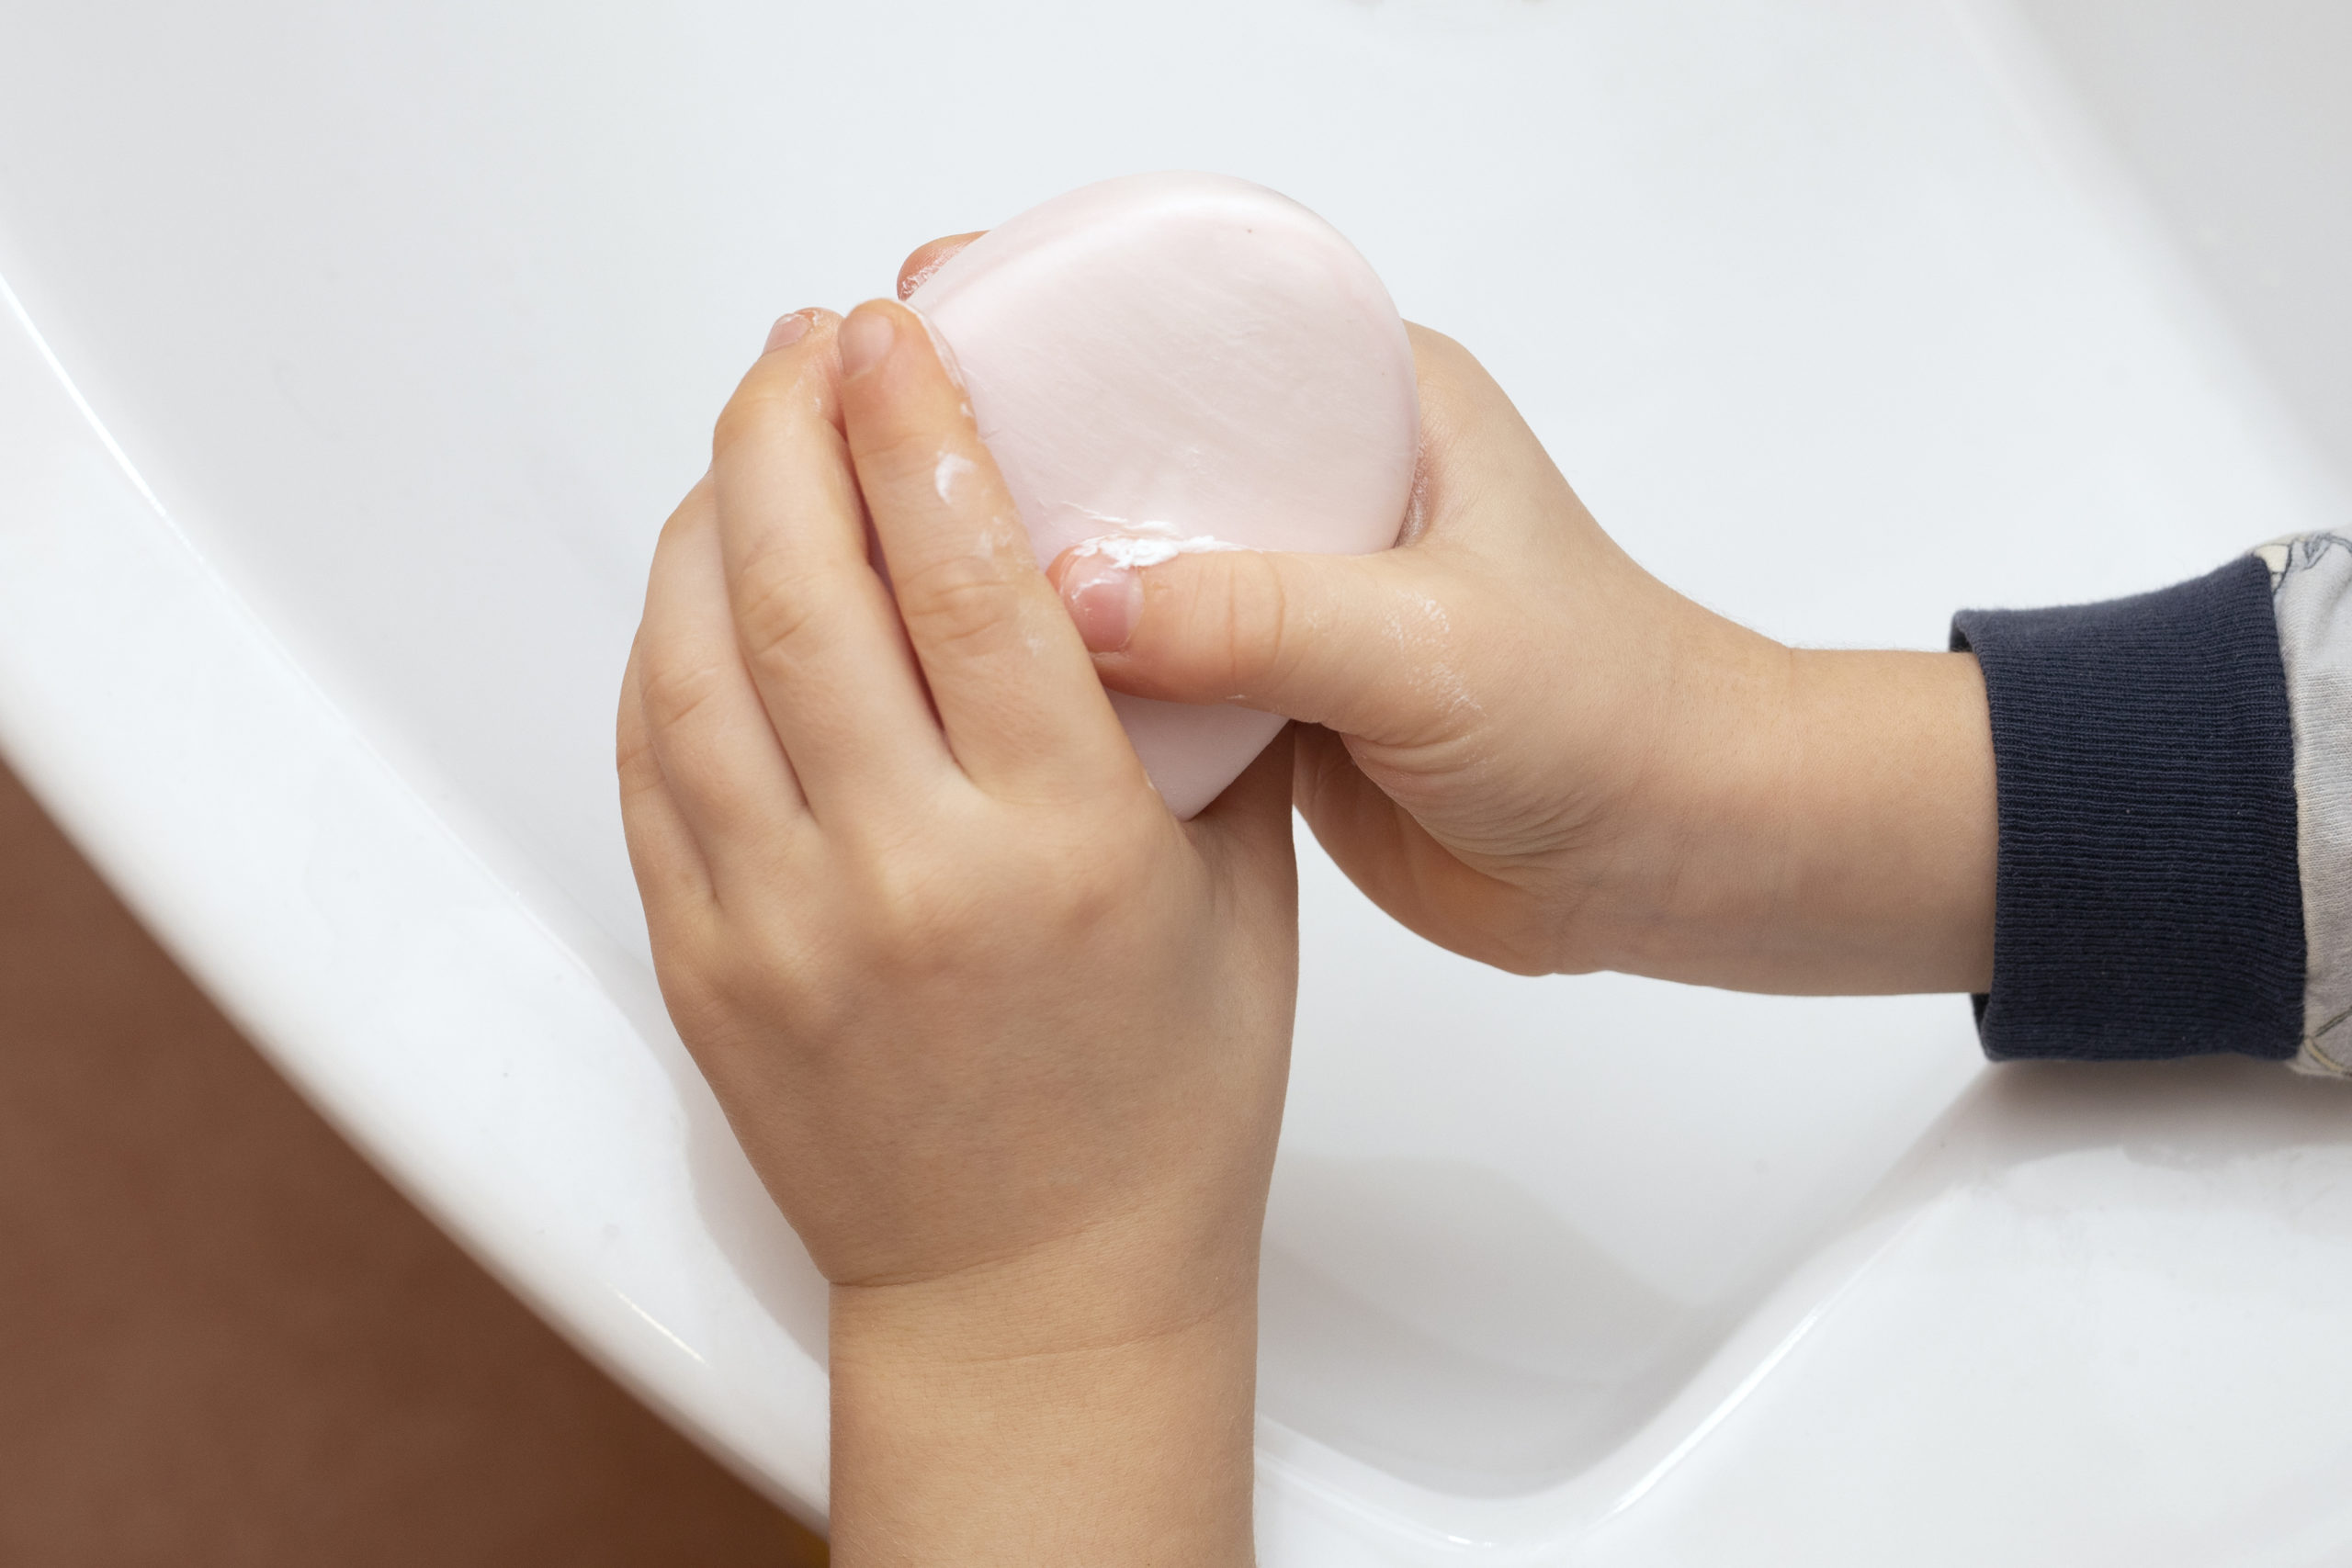 child washes, cleans hands with soap. Hygiene concept.